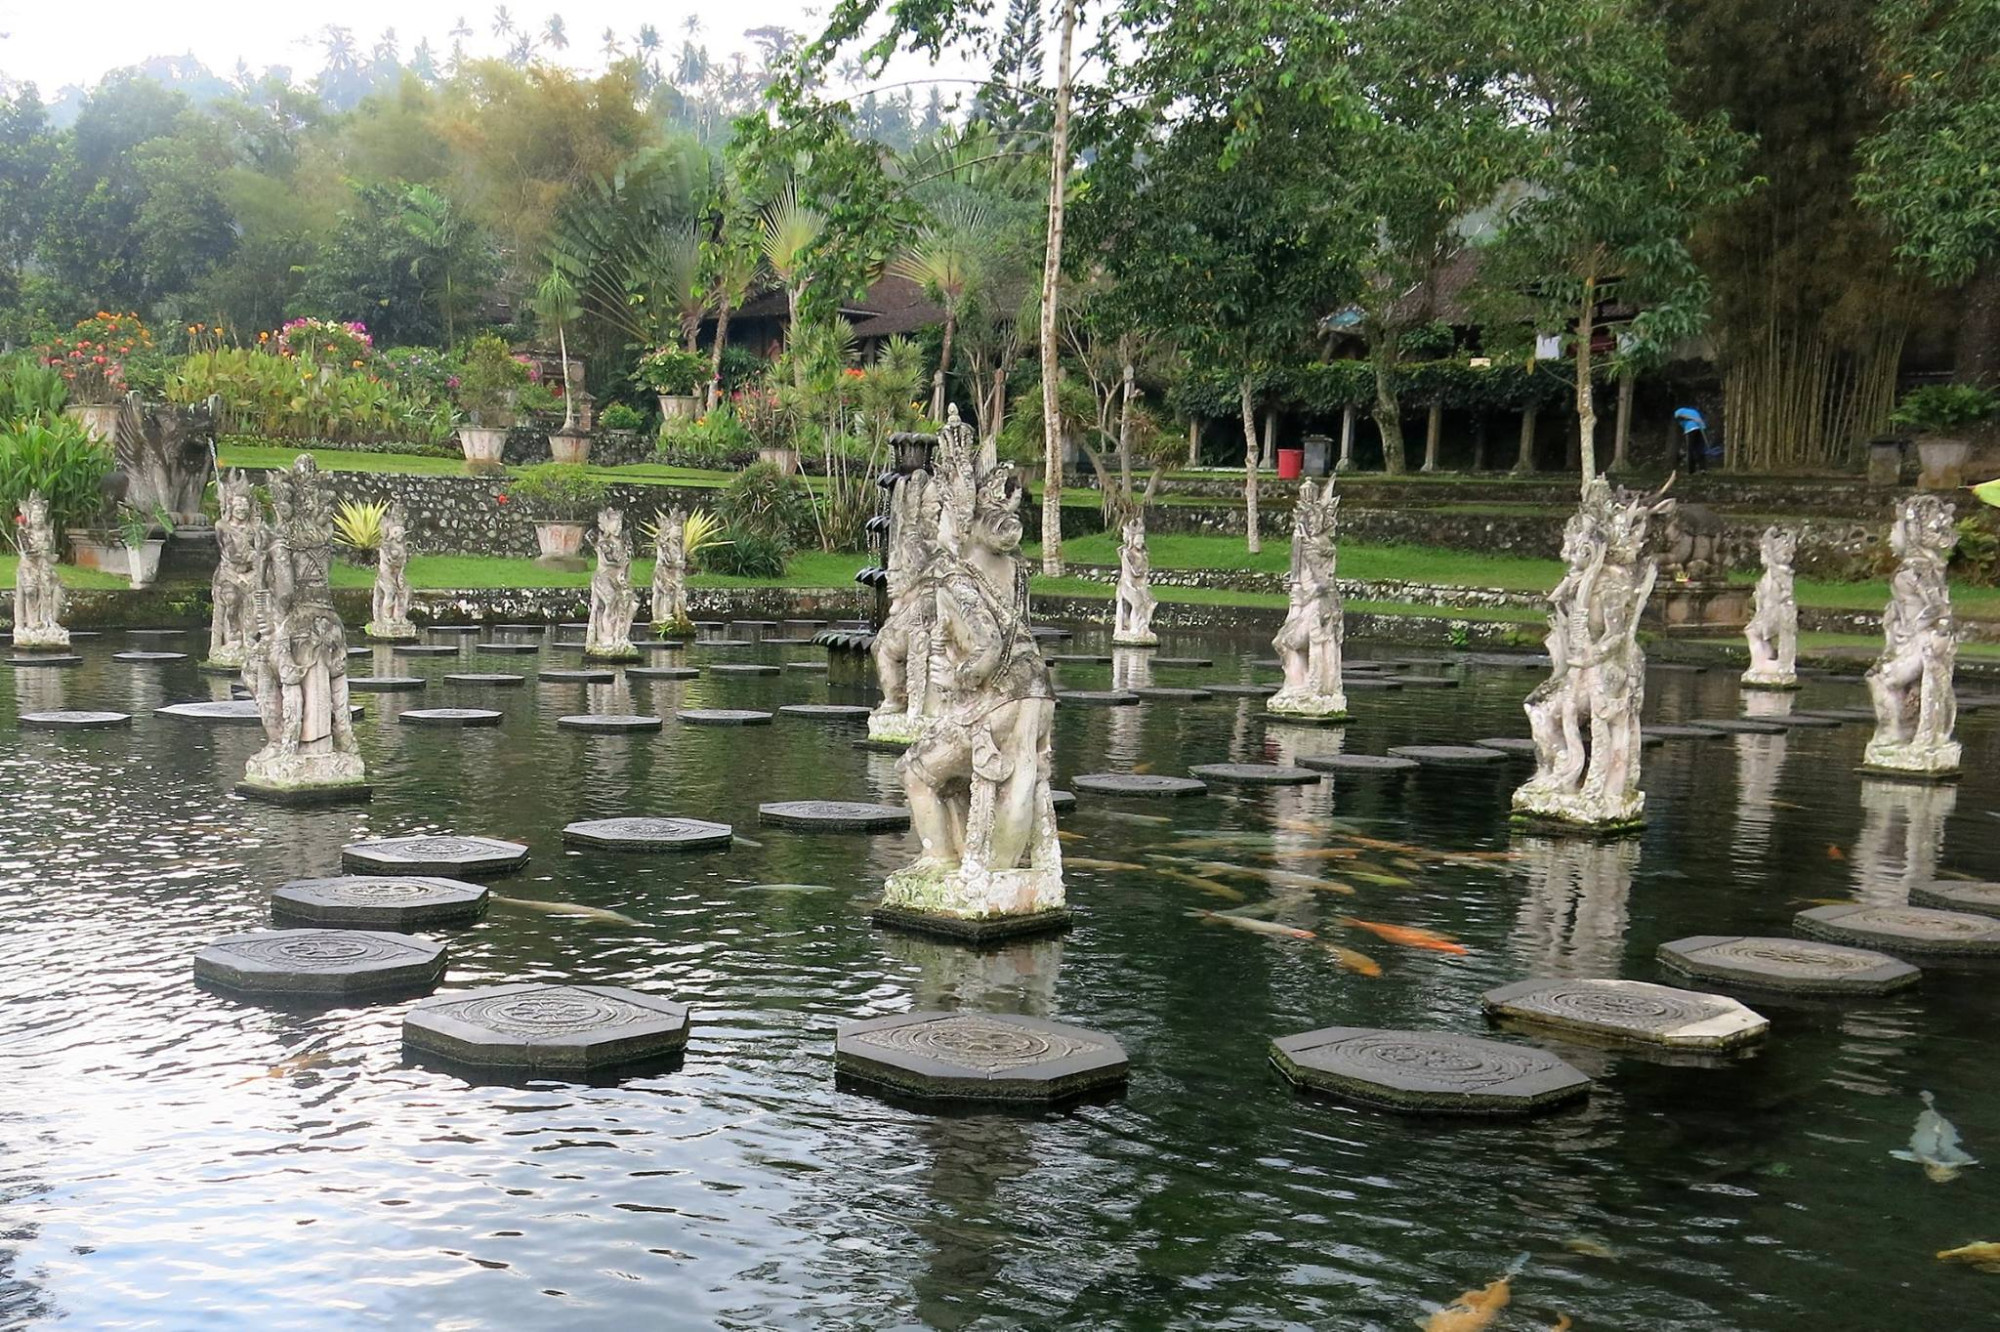 Statues in Pool